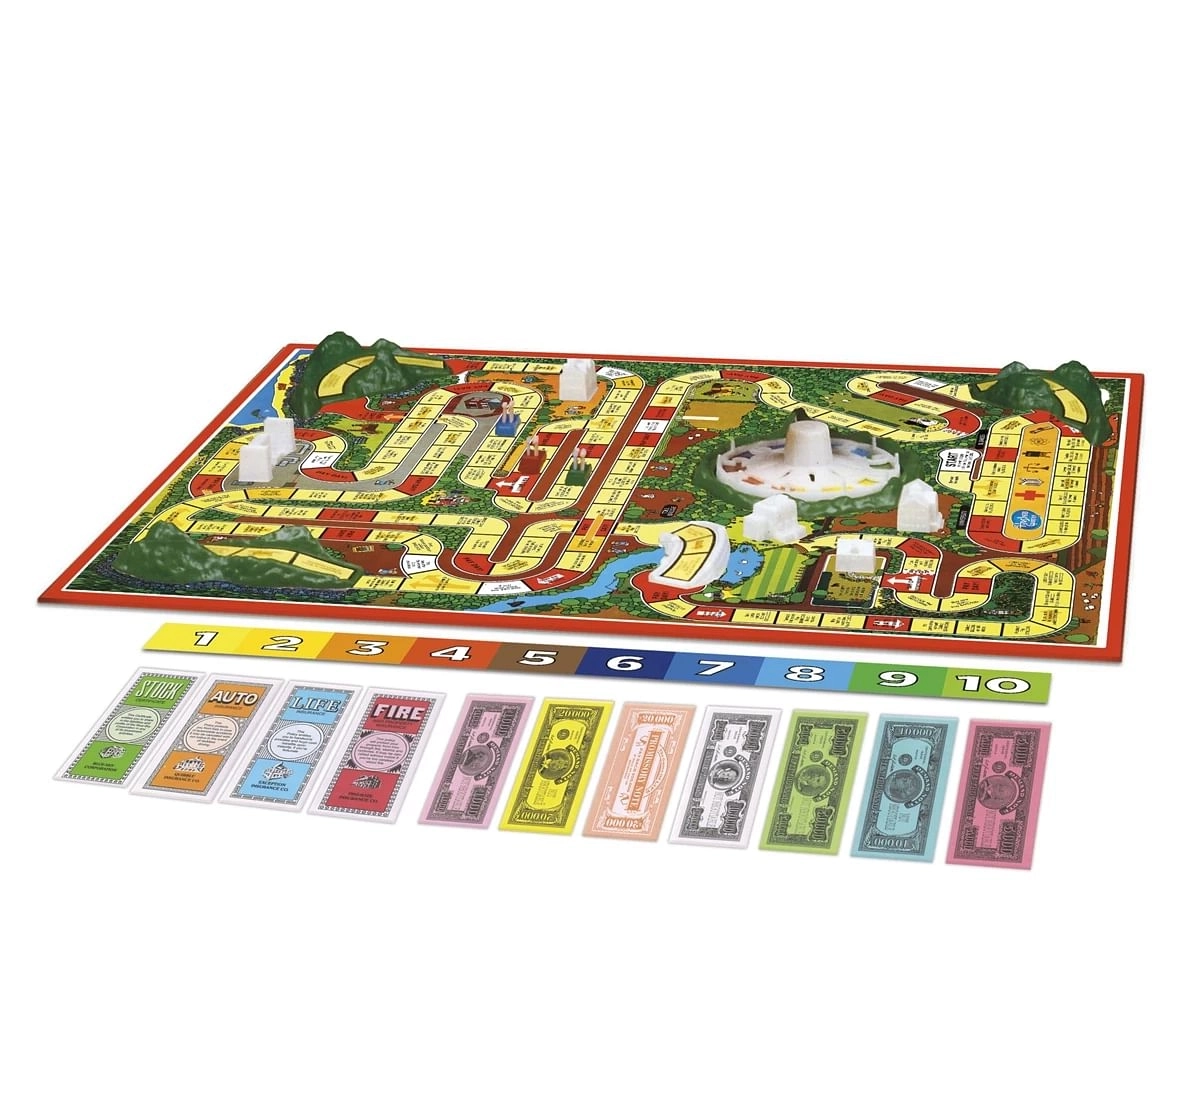 Hasbro The Game Of Life Board Game For Families and Friends 9Y+, Multicolour